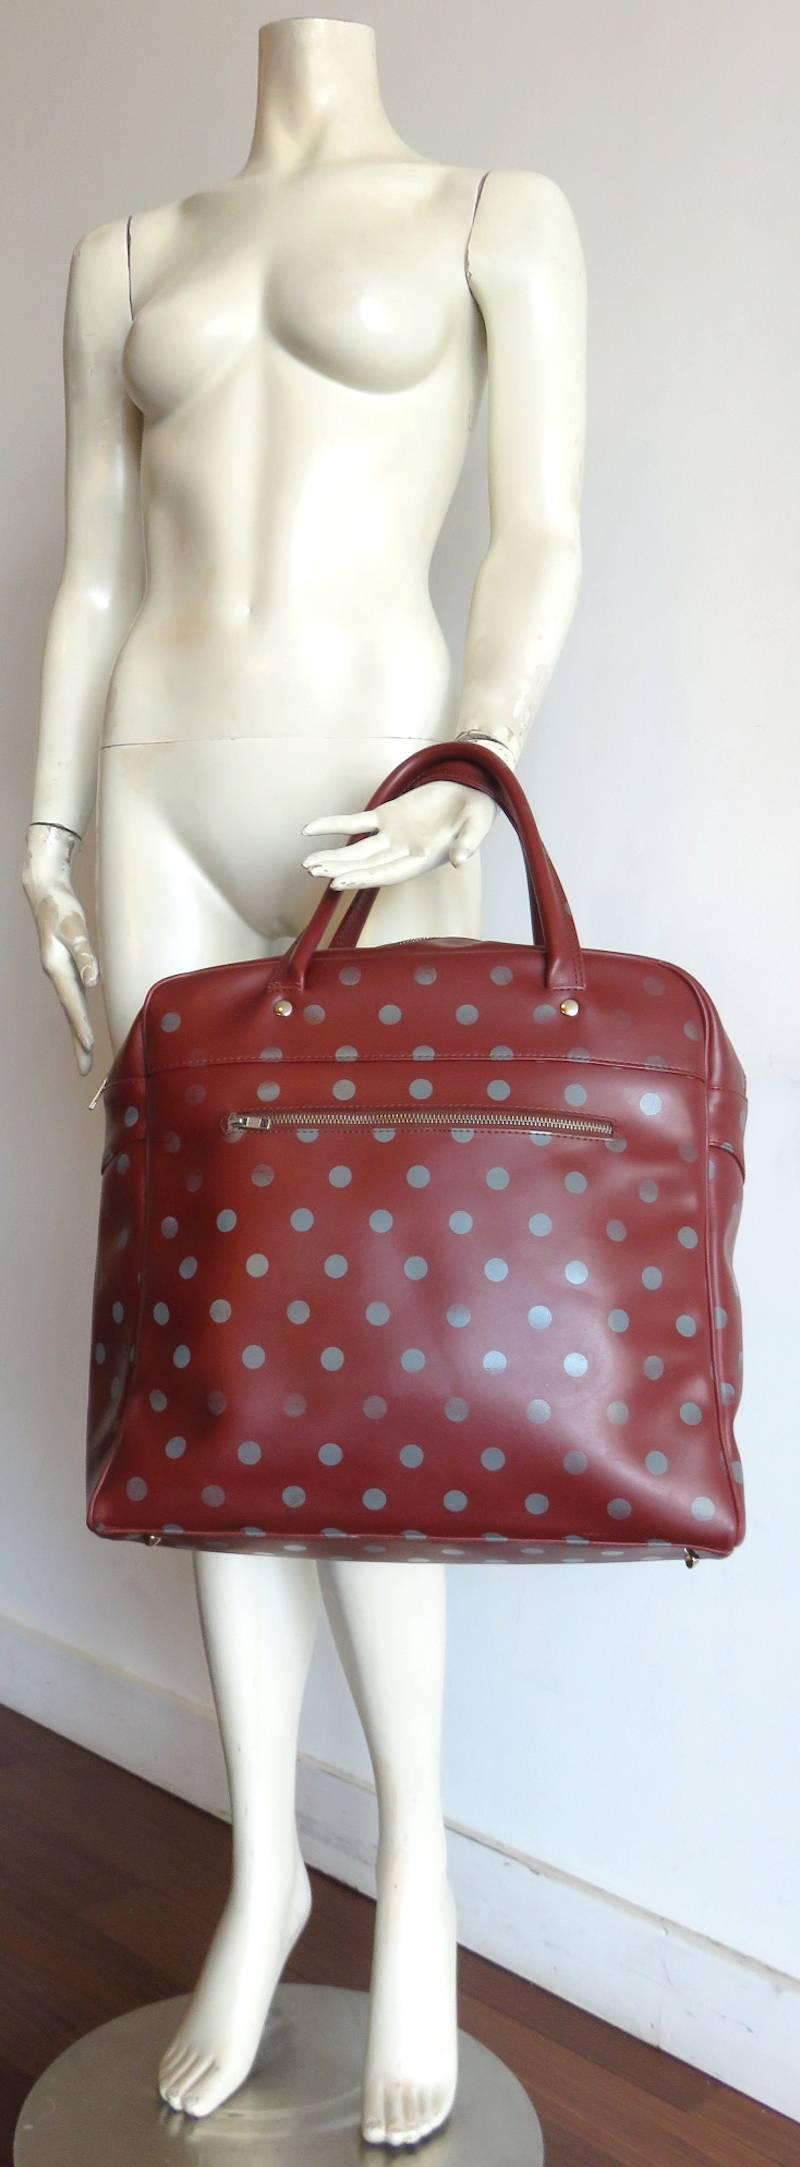 COMME DES GARCONS Polka dot travel bag.

Dark red ground with gray polka-dots.

Metal zip front pocket on front exterior.

Metal zip at top opening with zipper pocket at interior with second stash pocket as well.

Fully lined in black